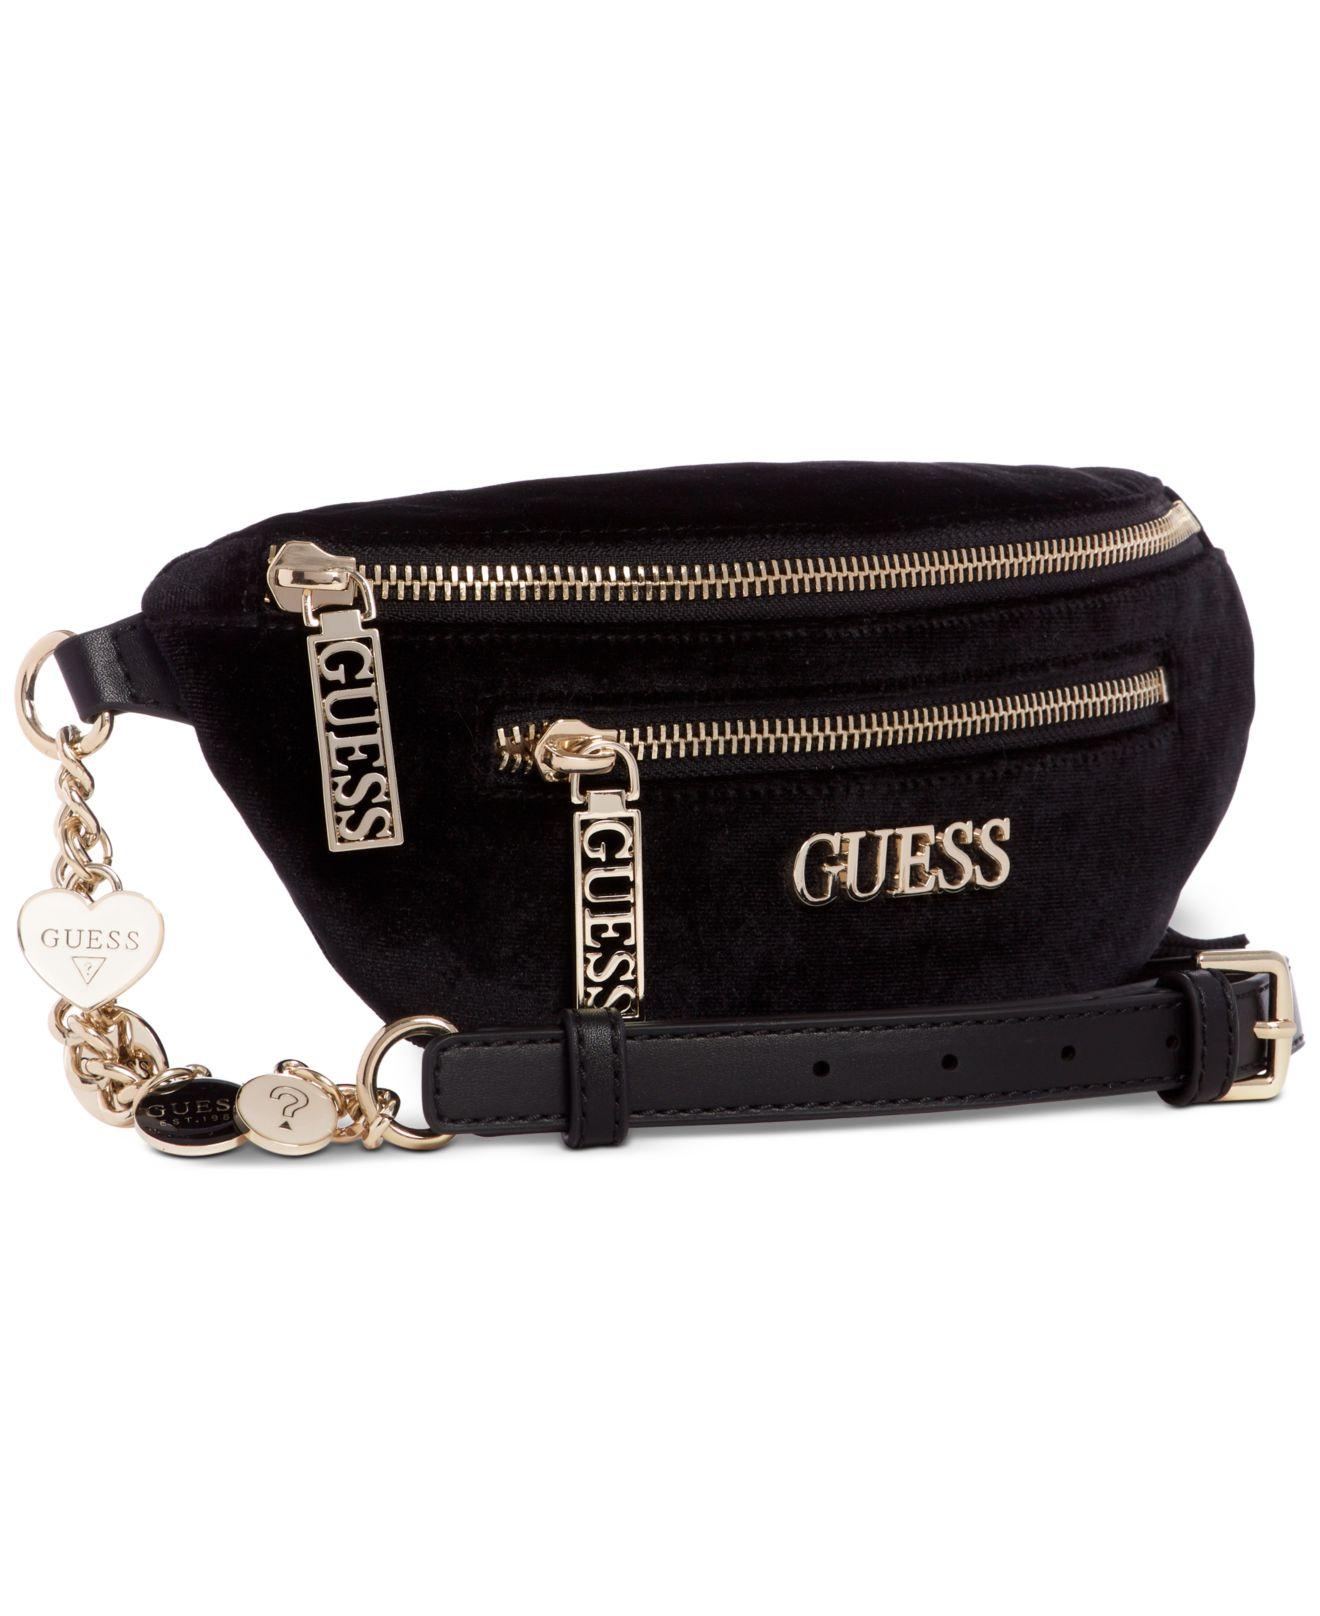 guess black fanny pack,Quality assurance,protein-burger.com